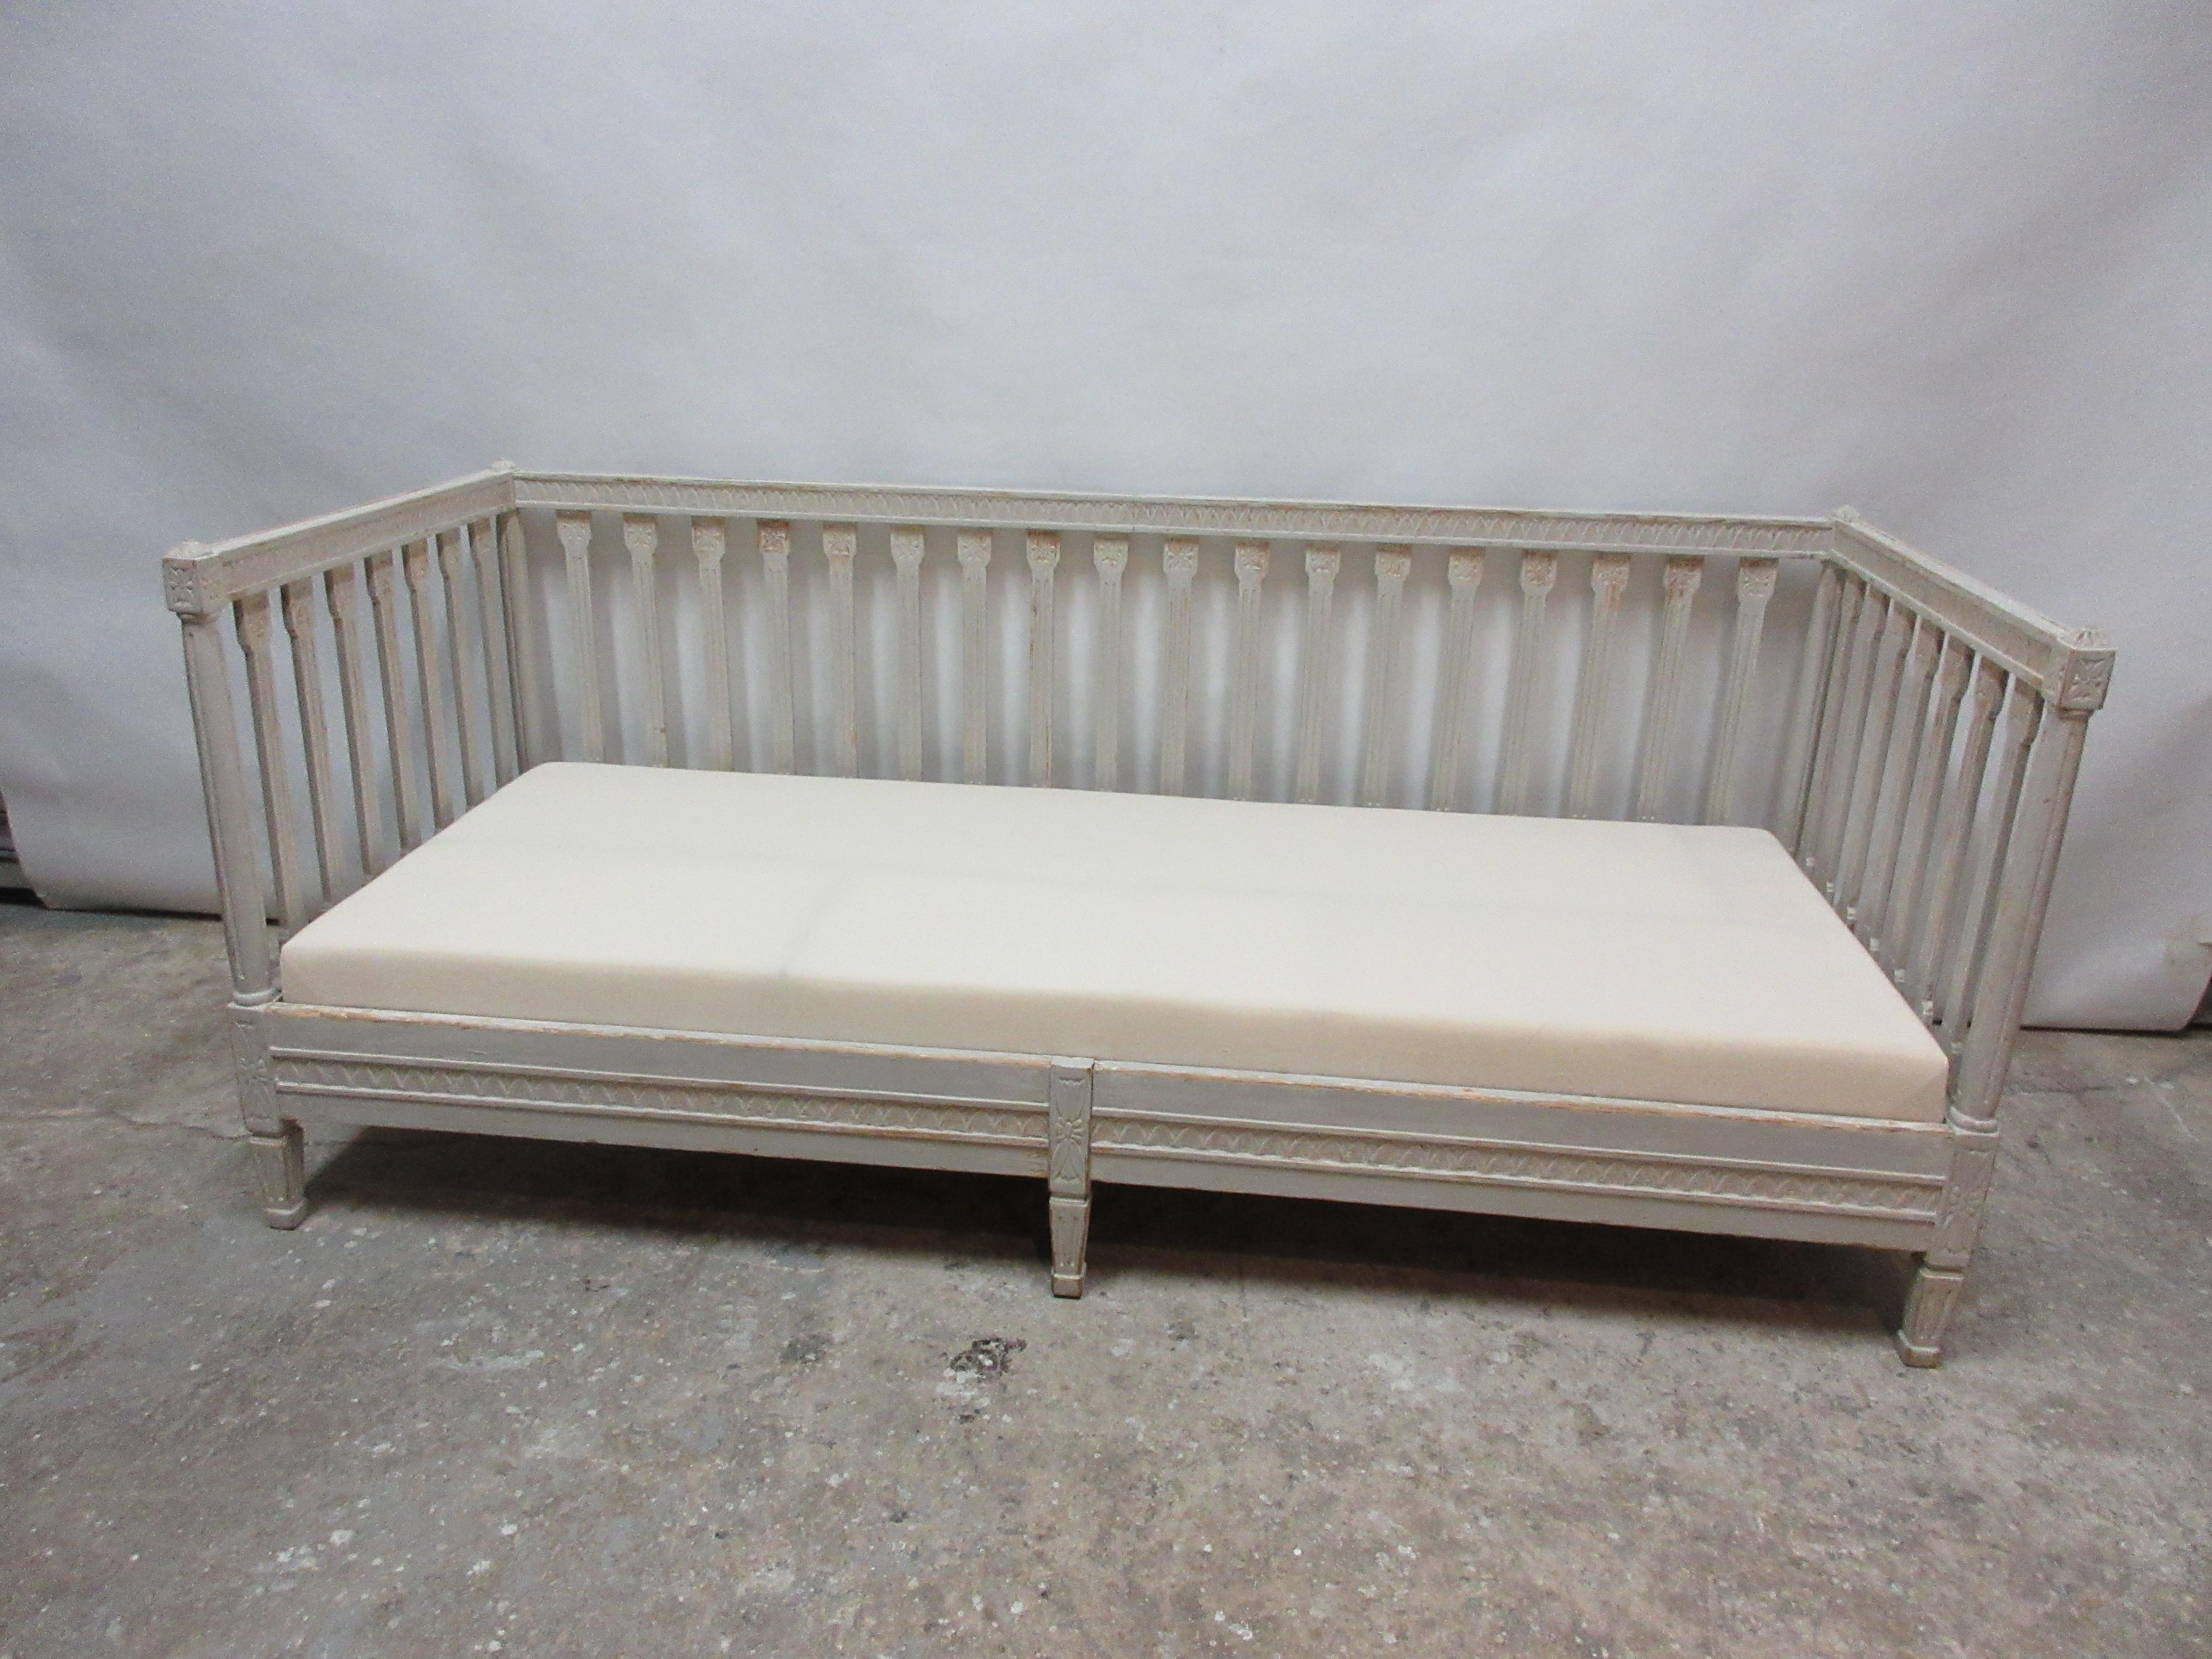 This is a 100% original painted Swedish Gustavian daybed. It has a new Muslin seat made.